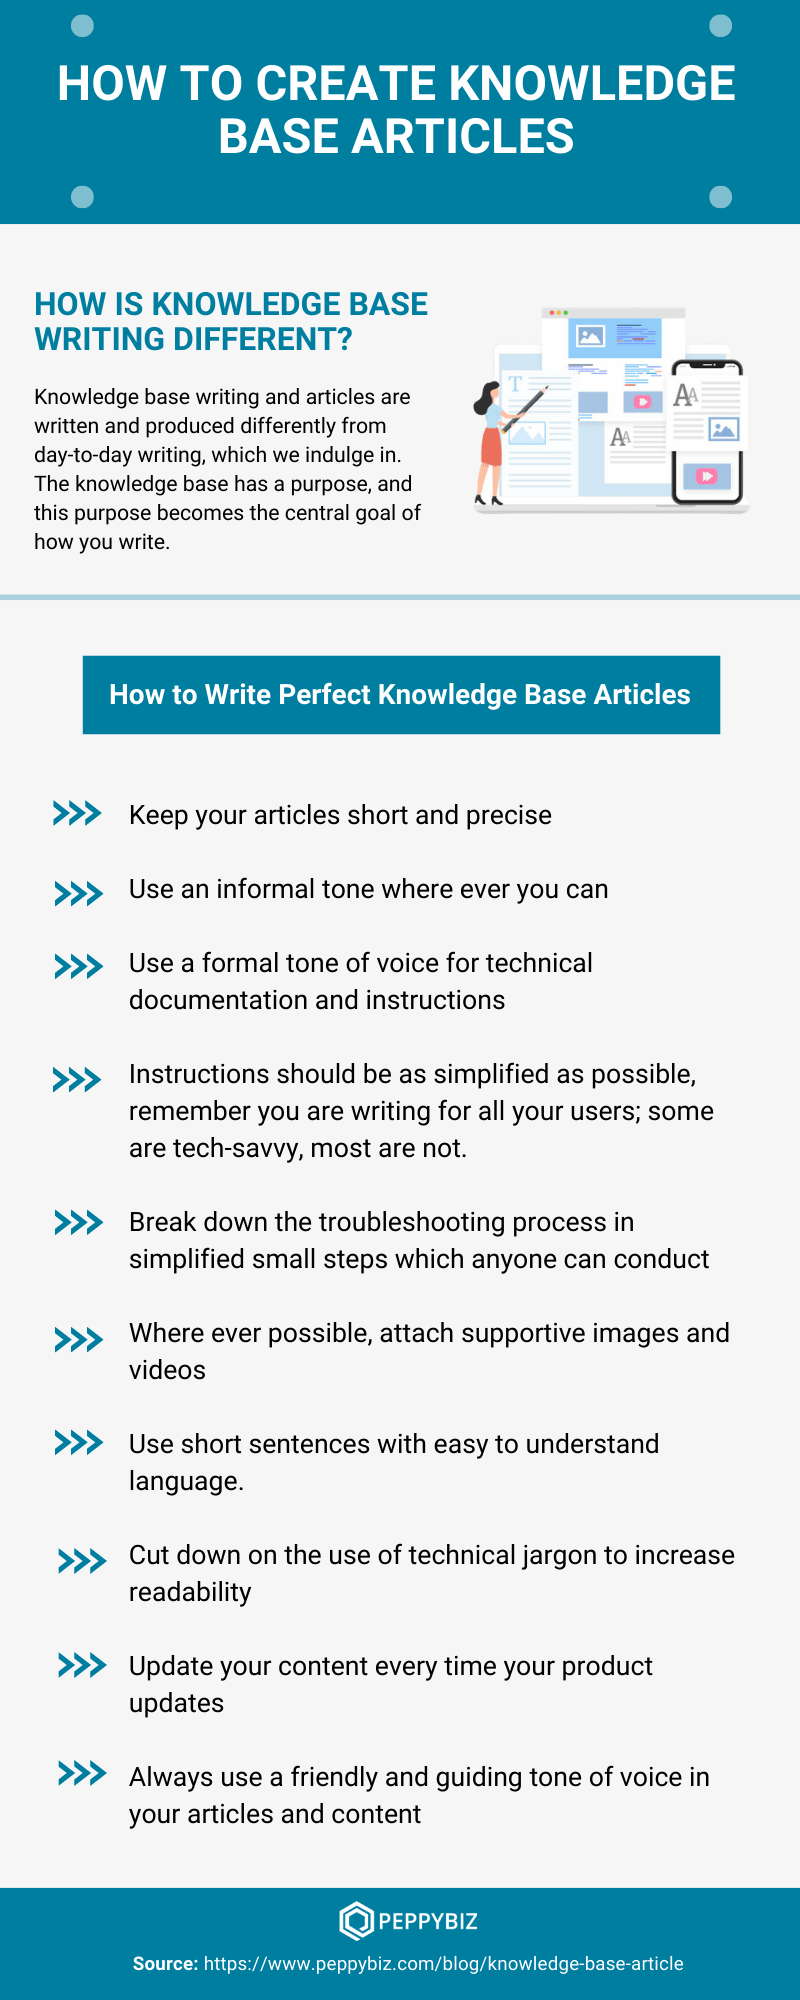 How to Create a Knowledge Base Article